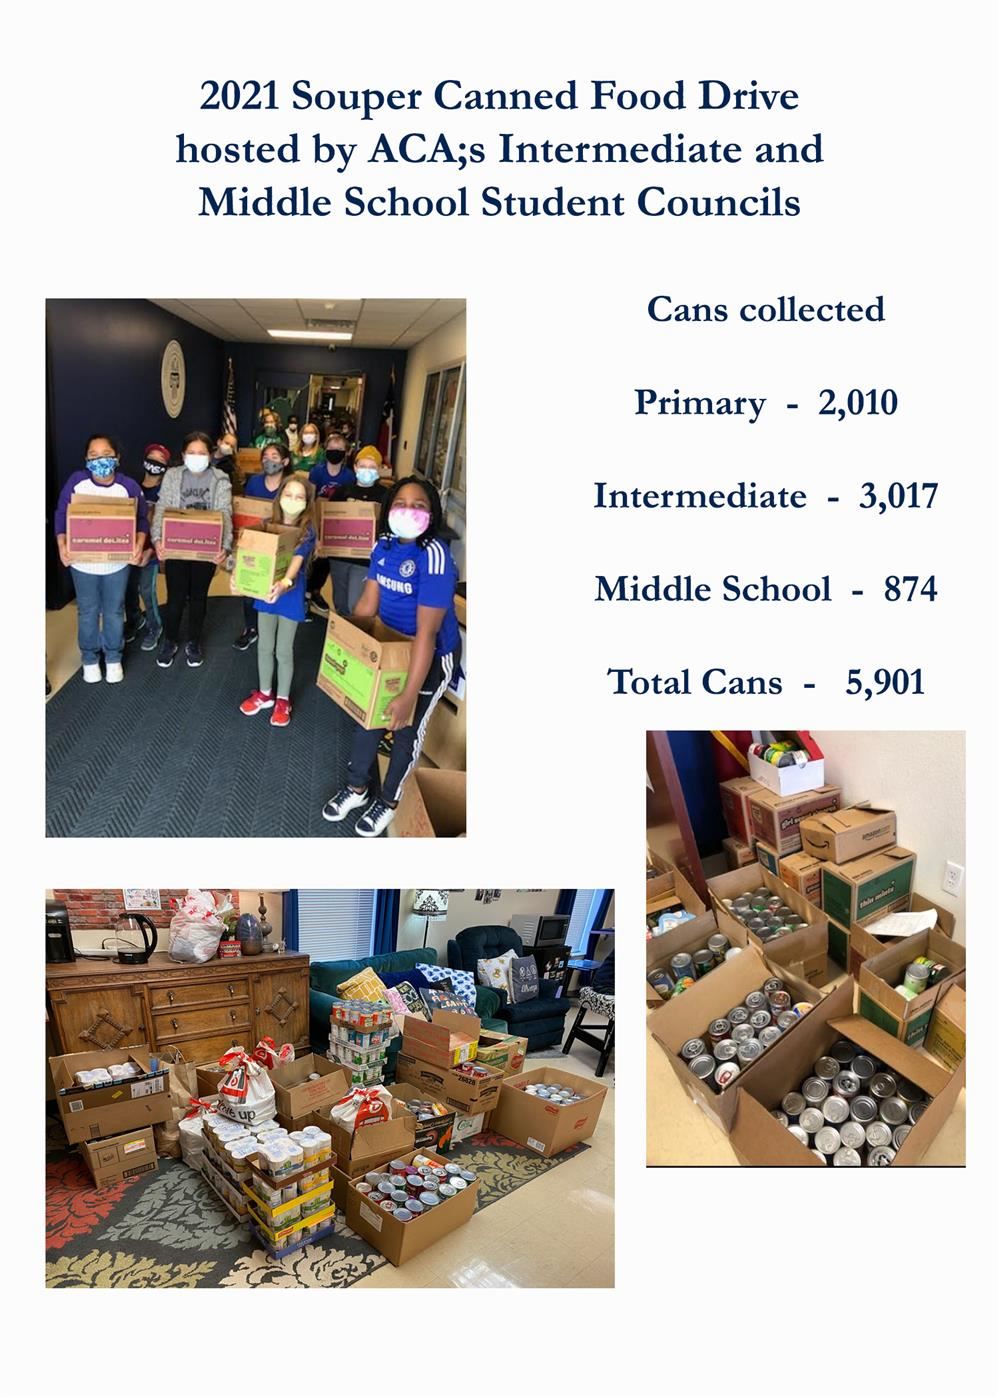  2021 Souper Canned Food Drive